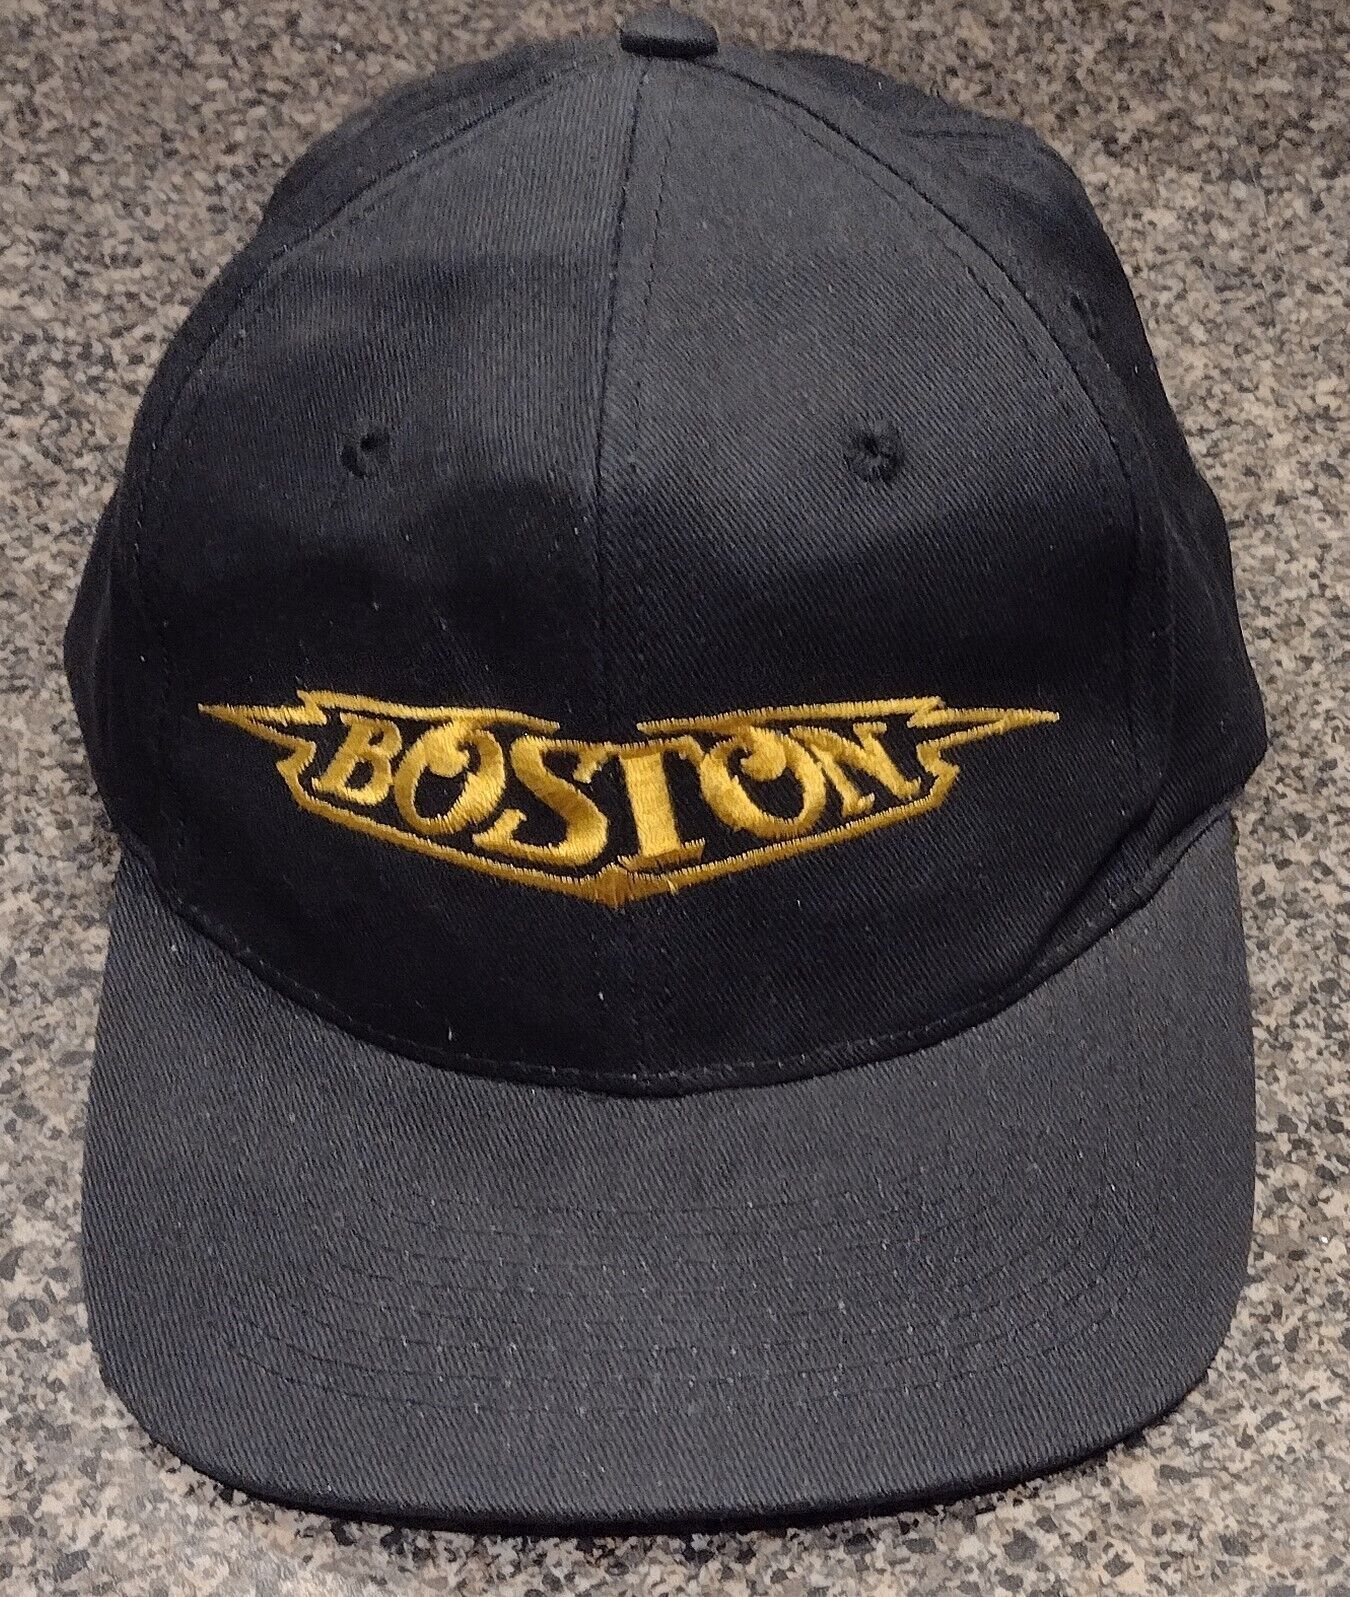 Vintage Boston Hat from Pine Know Michigan Concert.